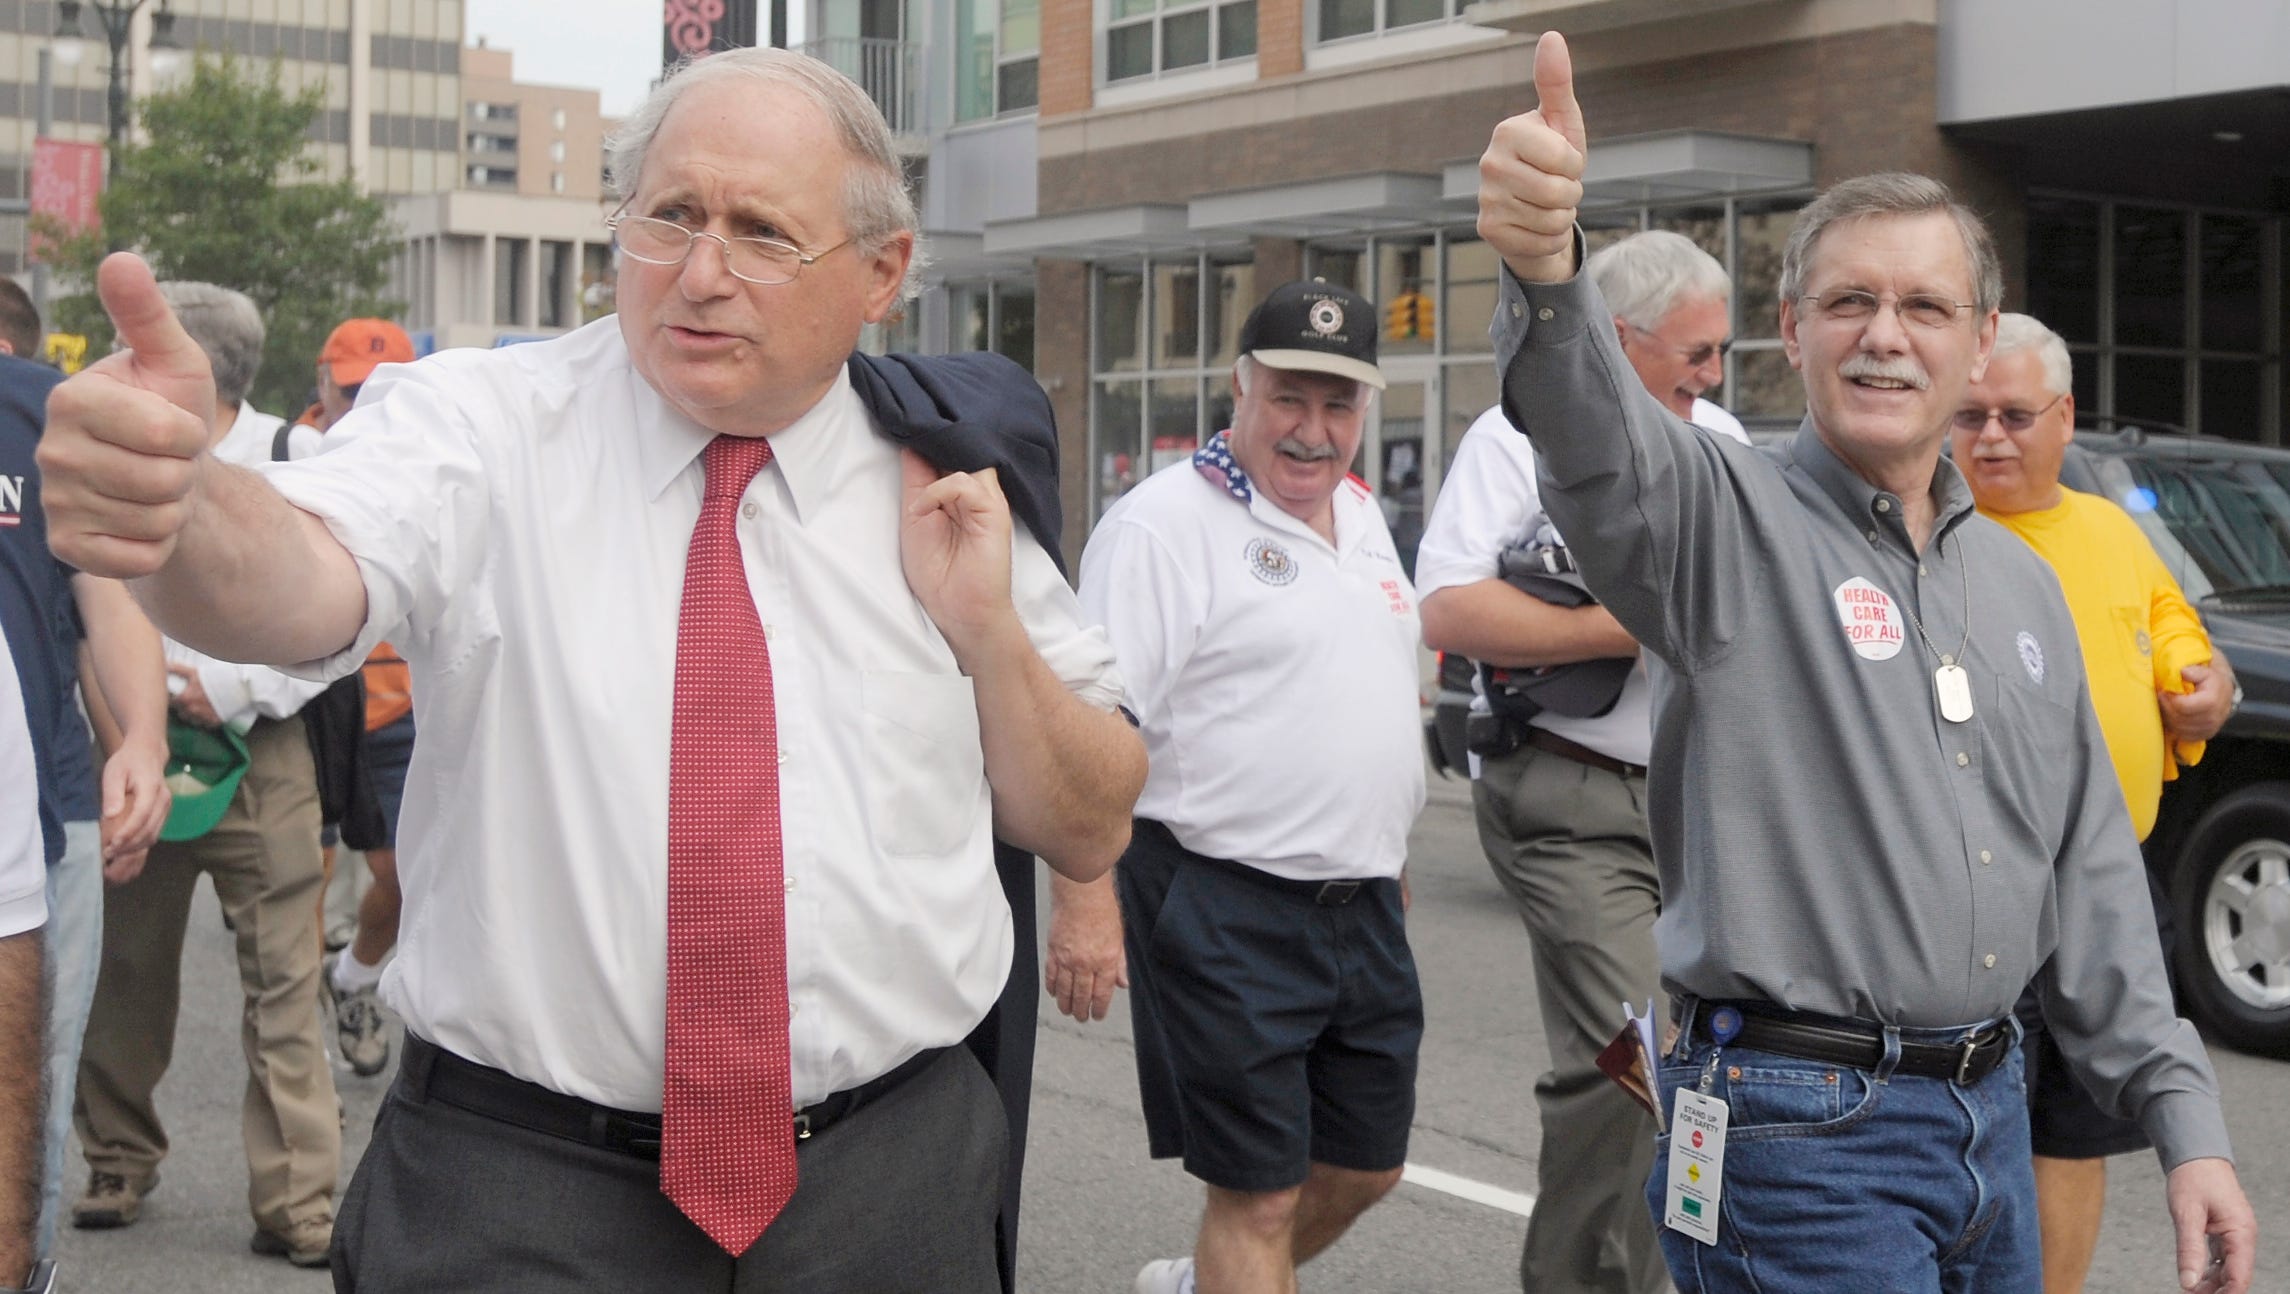 Sen. Carl Levin marches with UAW President Ron Gettelfinger in the annual Labor Day parade down Woodward Avenue in Detroit on  Sept. 7, 2009.